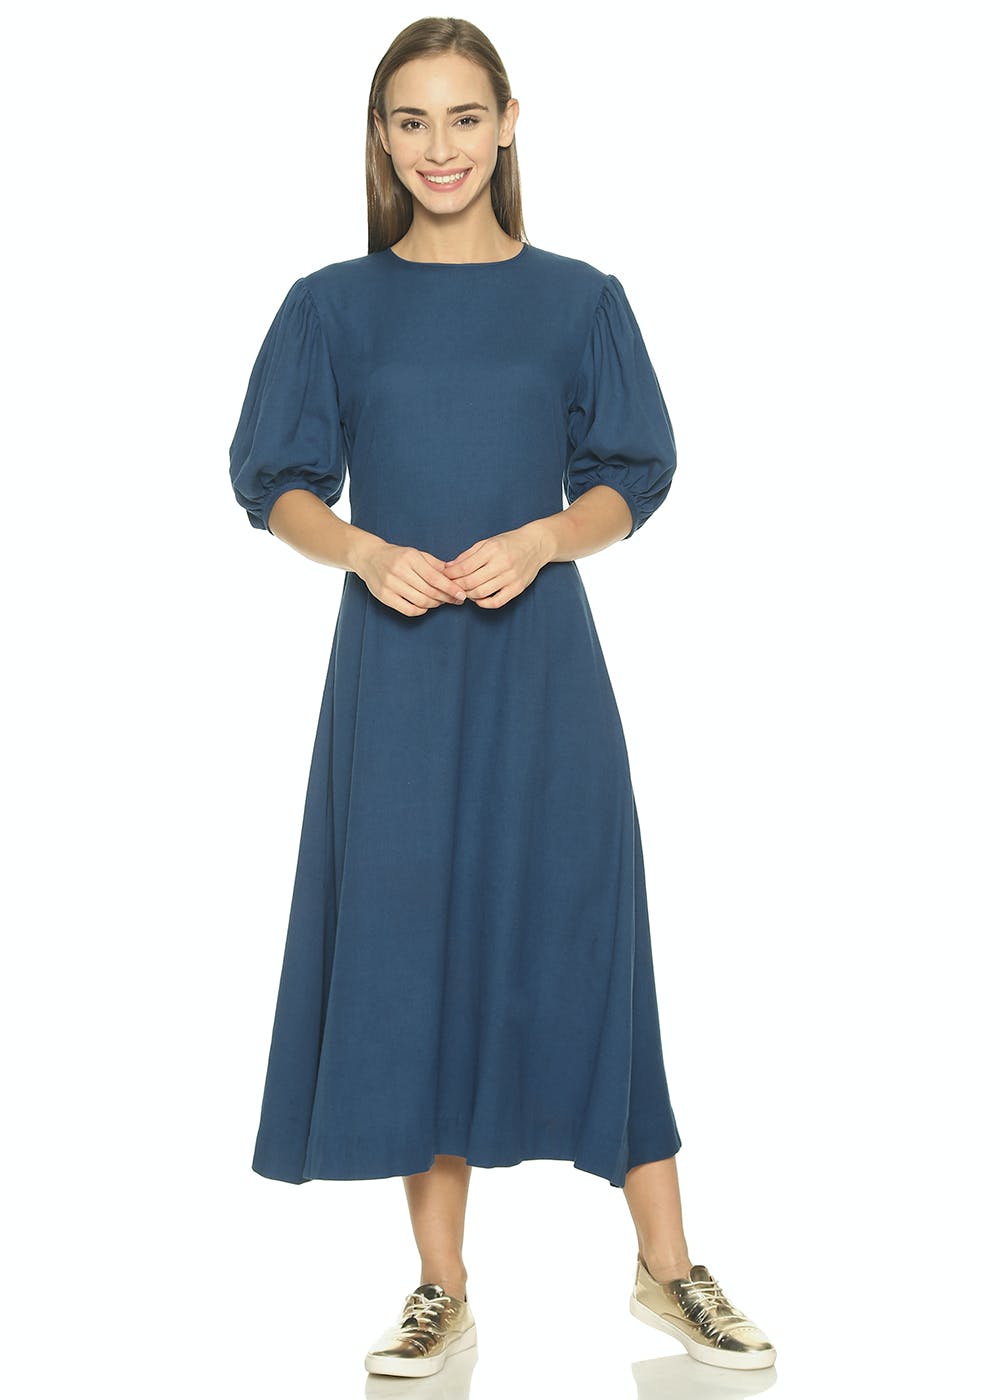 Get Navy Blue Puffed Sleeves Flared Dress at ₹ 2660 | LBB Shop